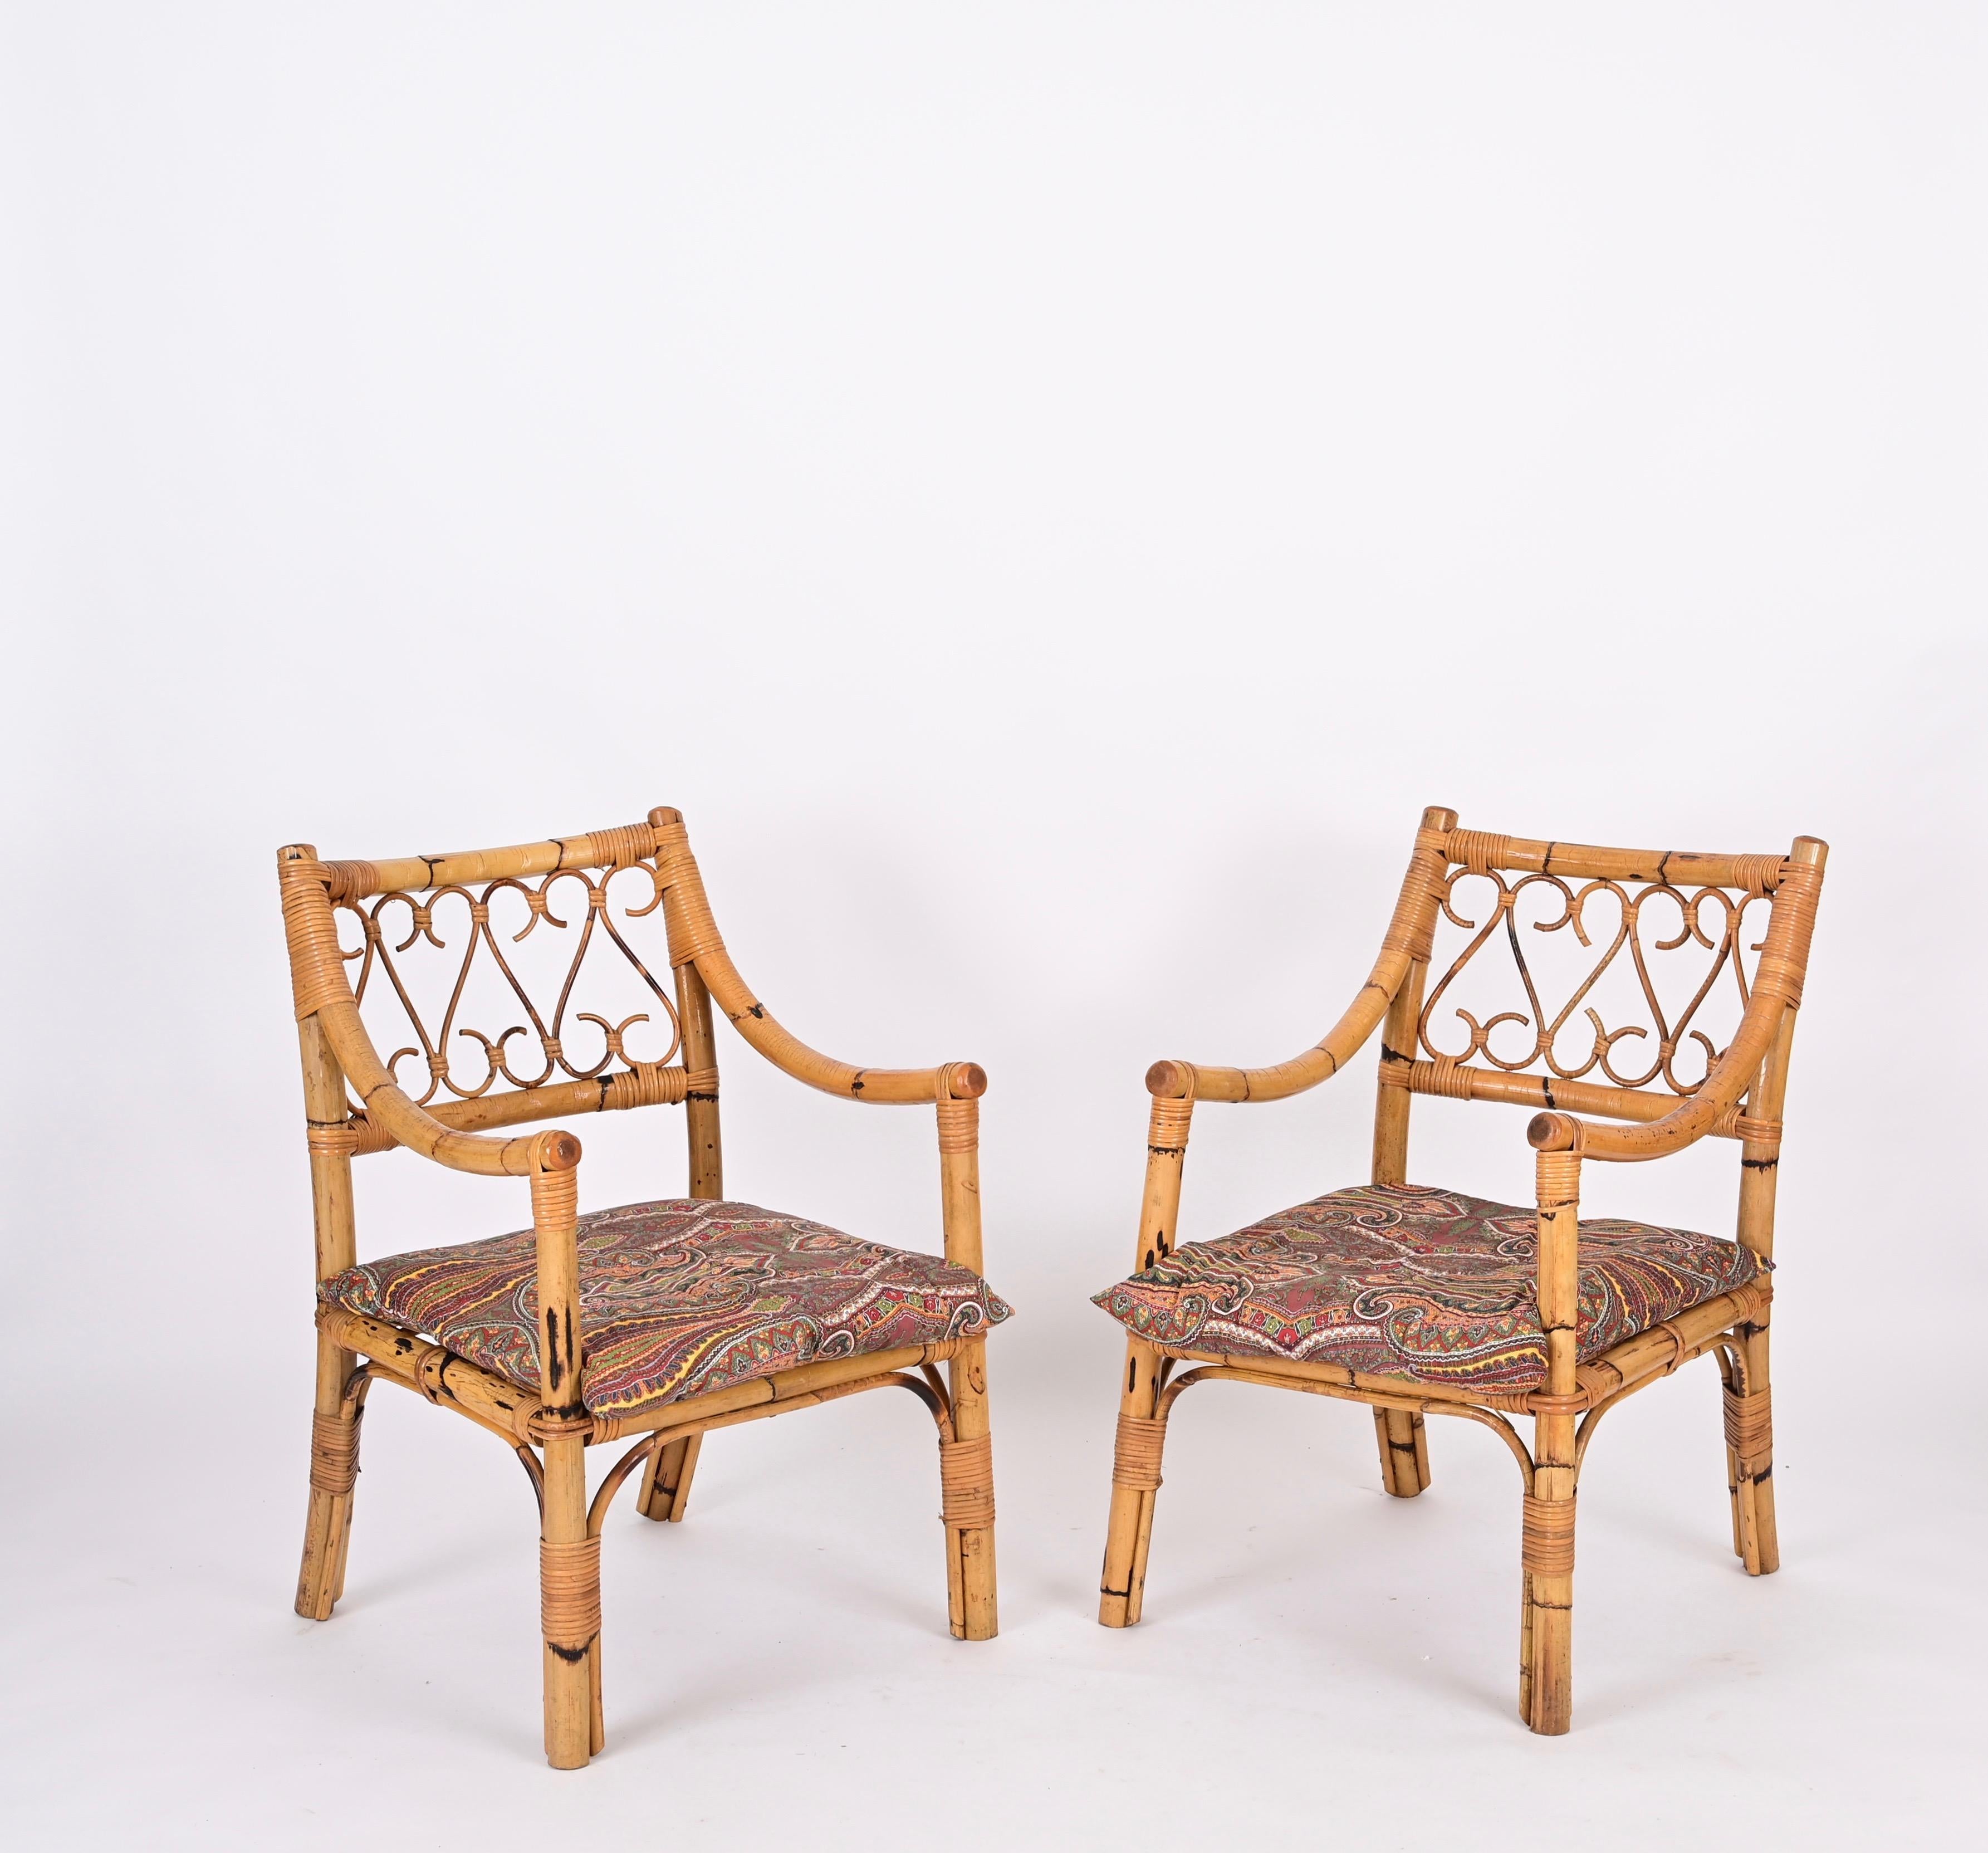 Pair of Vivai del Sud Mid-Century Armchairs in Bamboo and Rattan, Italy 1970s For Sale 1